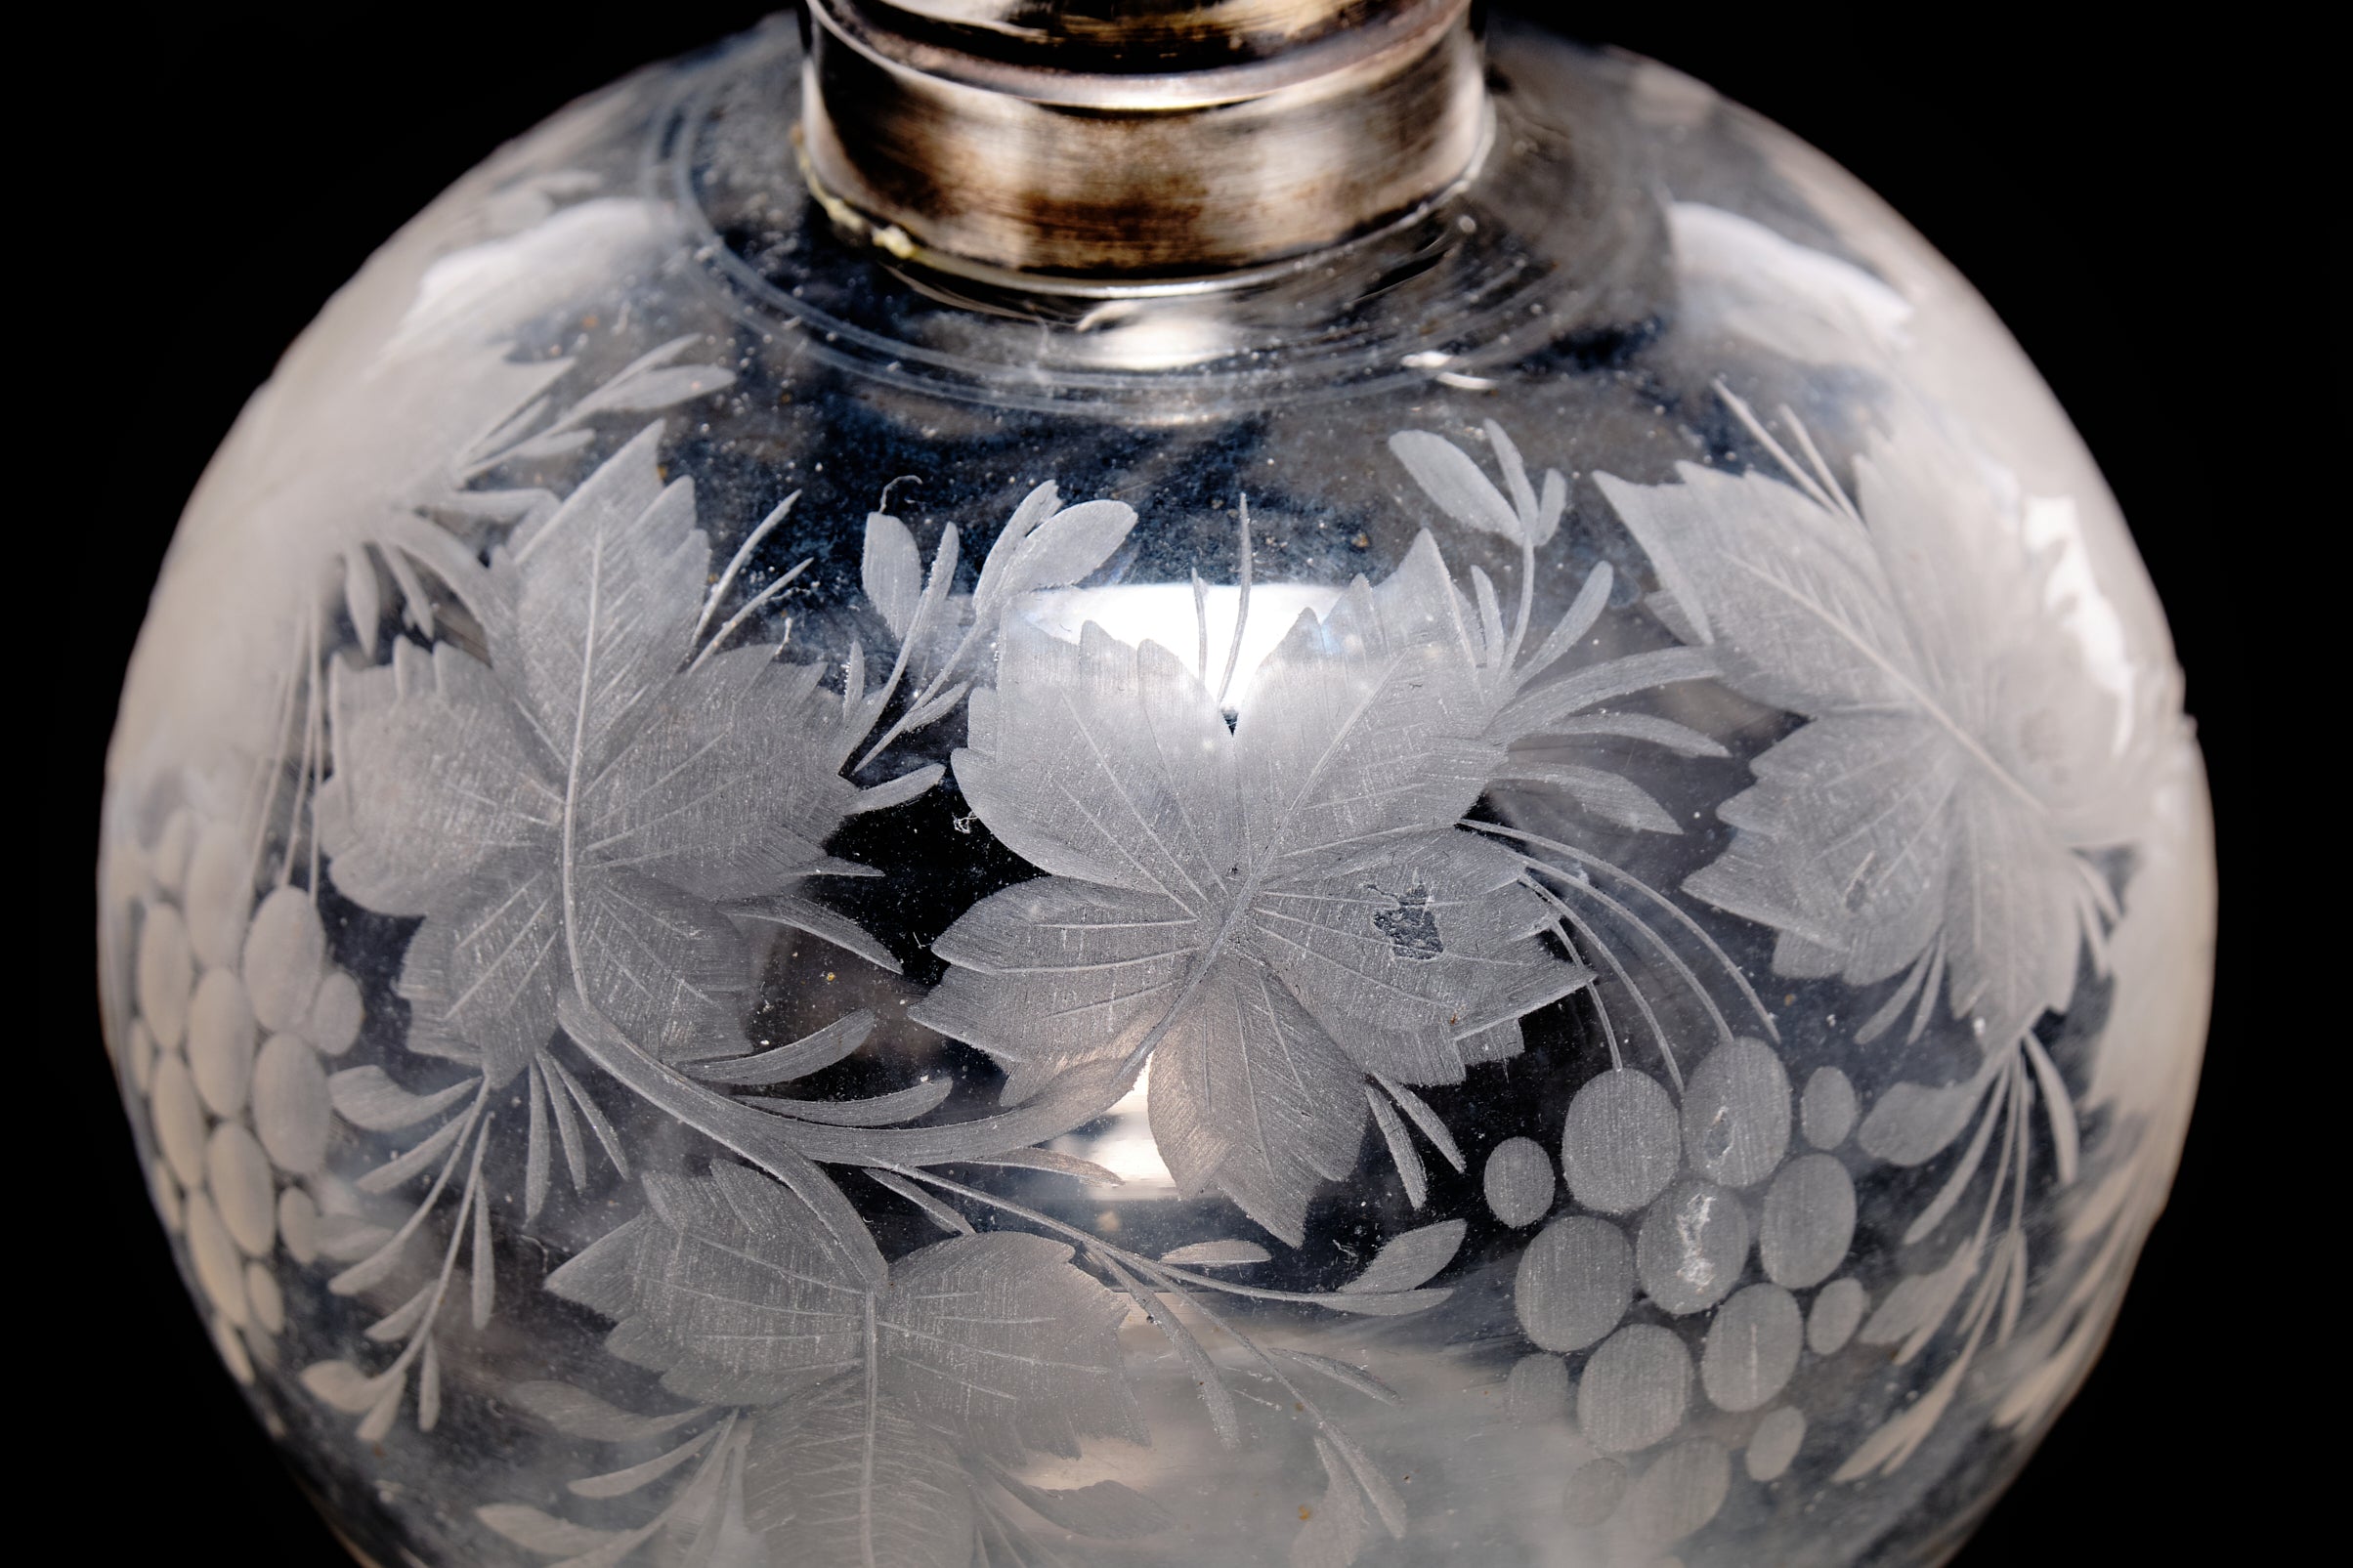 Edwardian Sterling Silver Topped, Etched Glass Perfume/Scent Bottle.